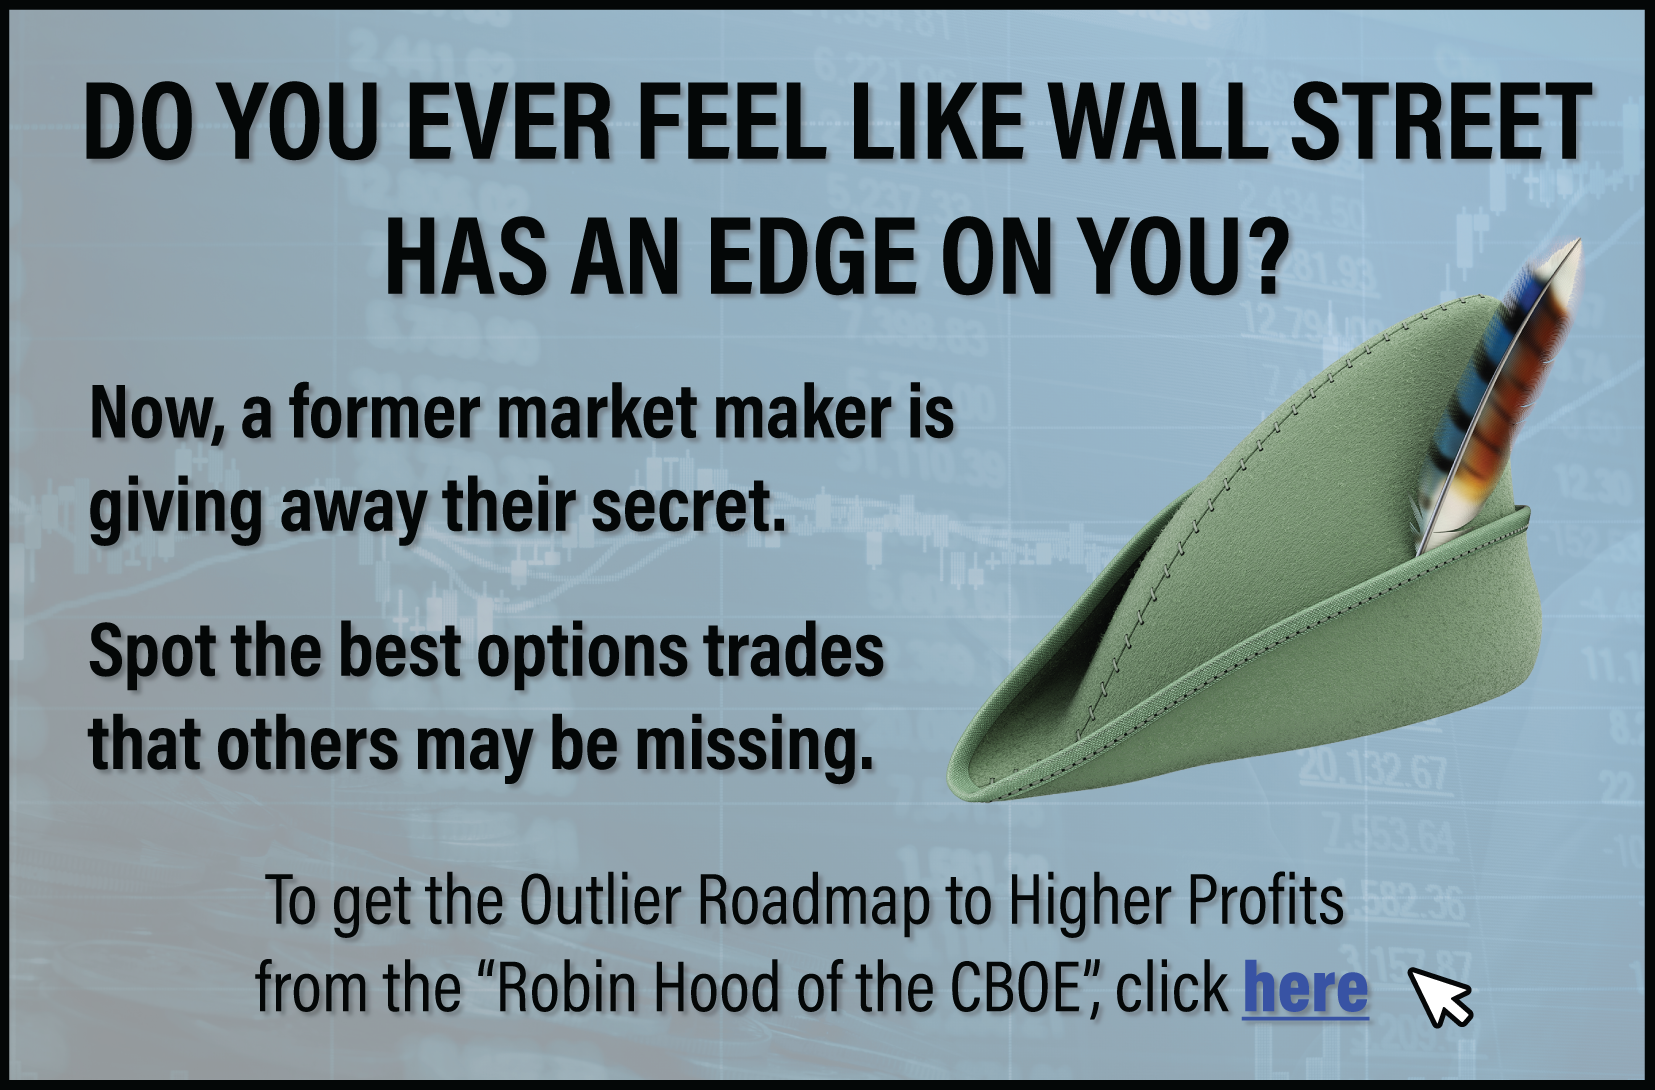 Did you ever feel like Wall Street has an edge on you? Now, a former market maker is giving away his secret. Spot the best options trades that others may be missing. To get the Outlier Roadmap To Higher Profits, click here.